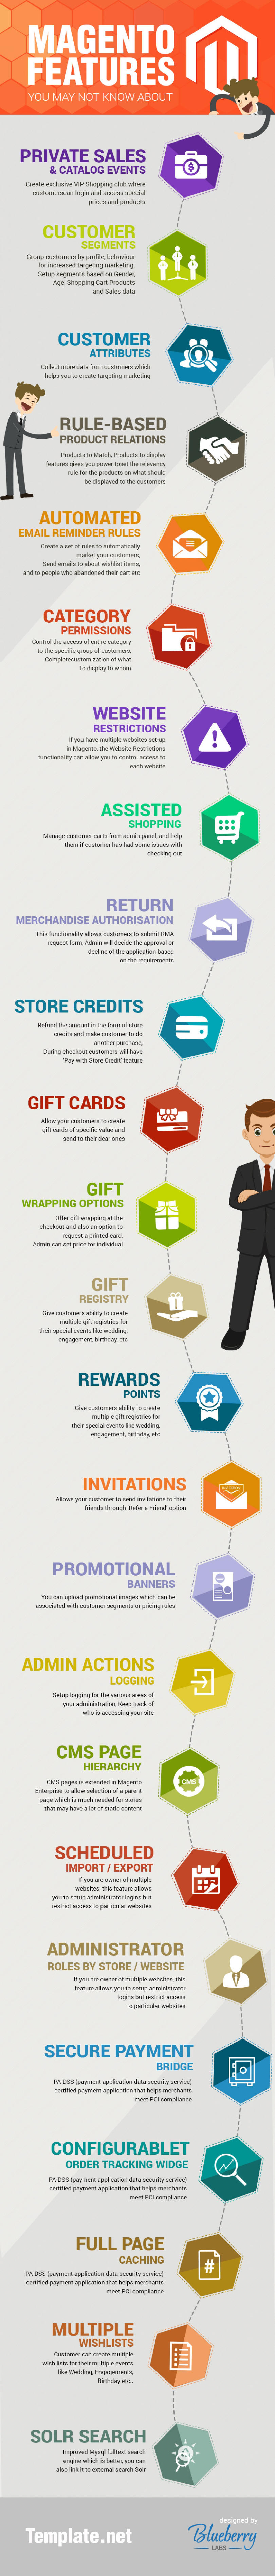 Magento features you may not know about - infographic